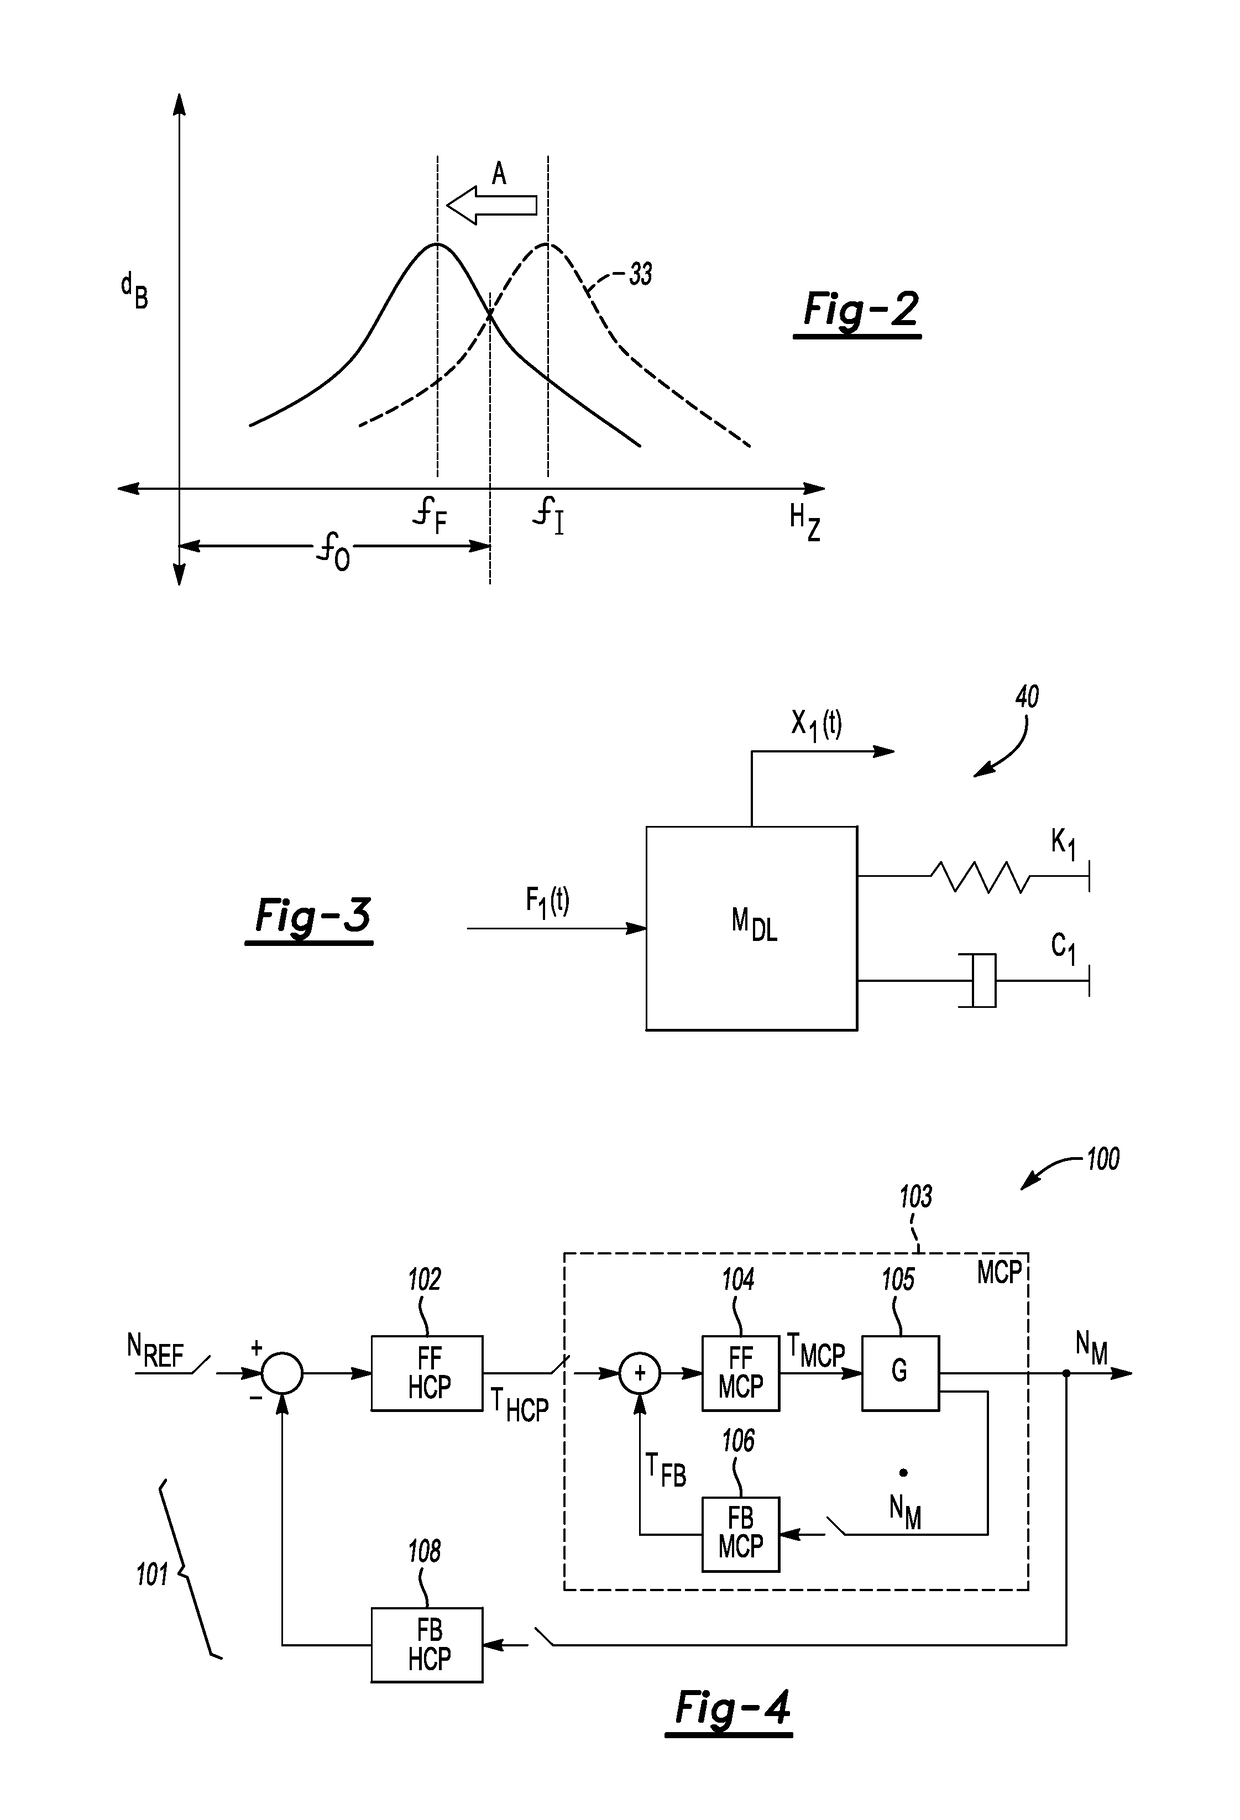 Driveline system with nested loop damping control